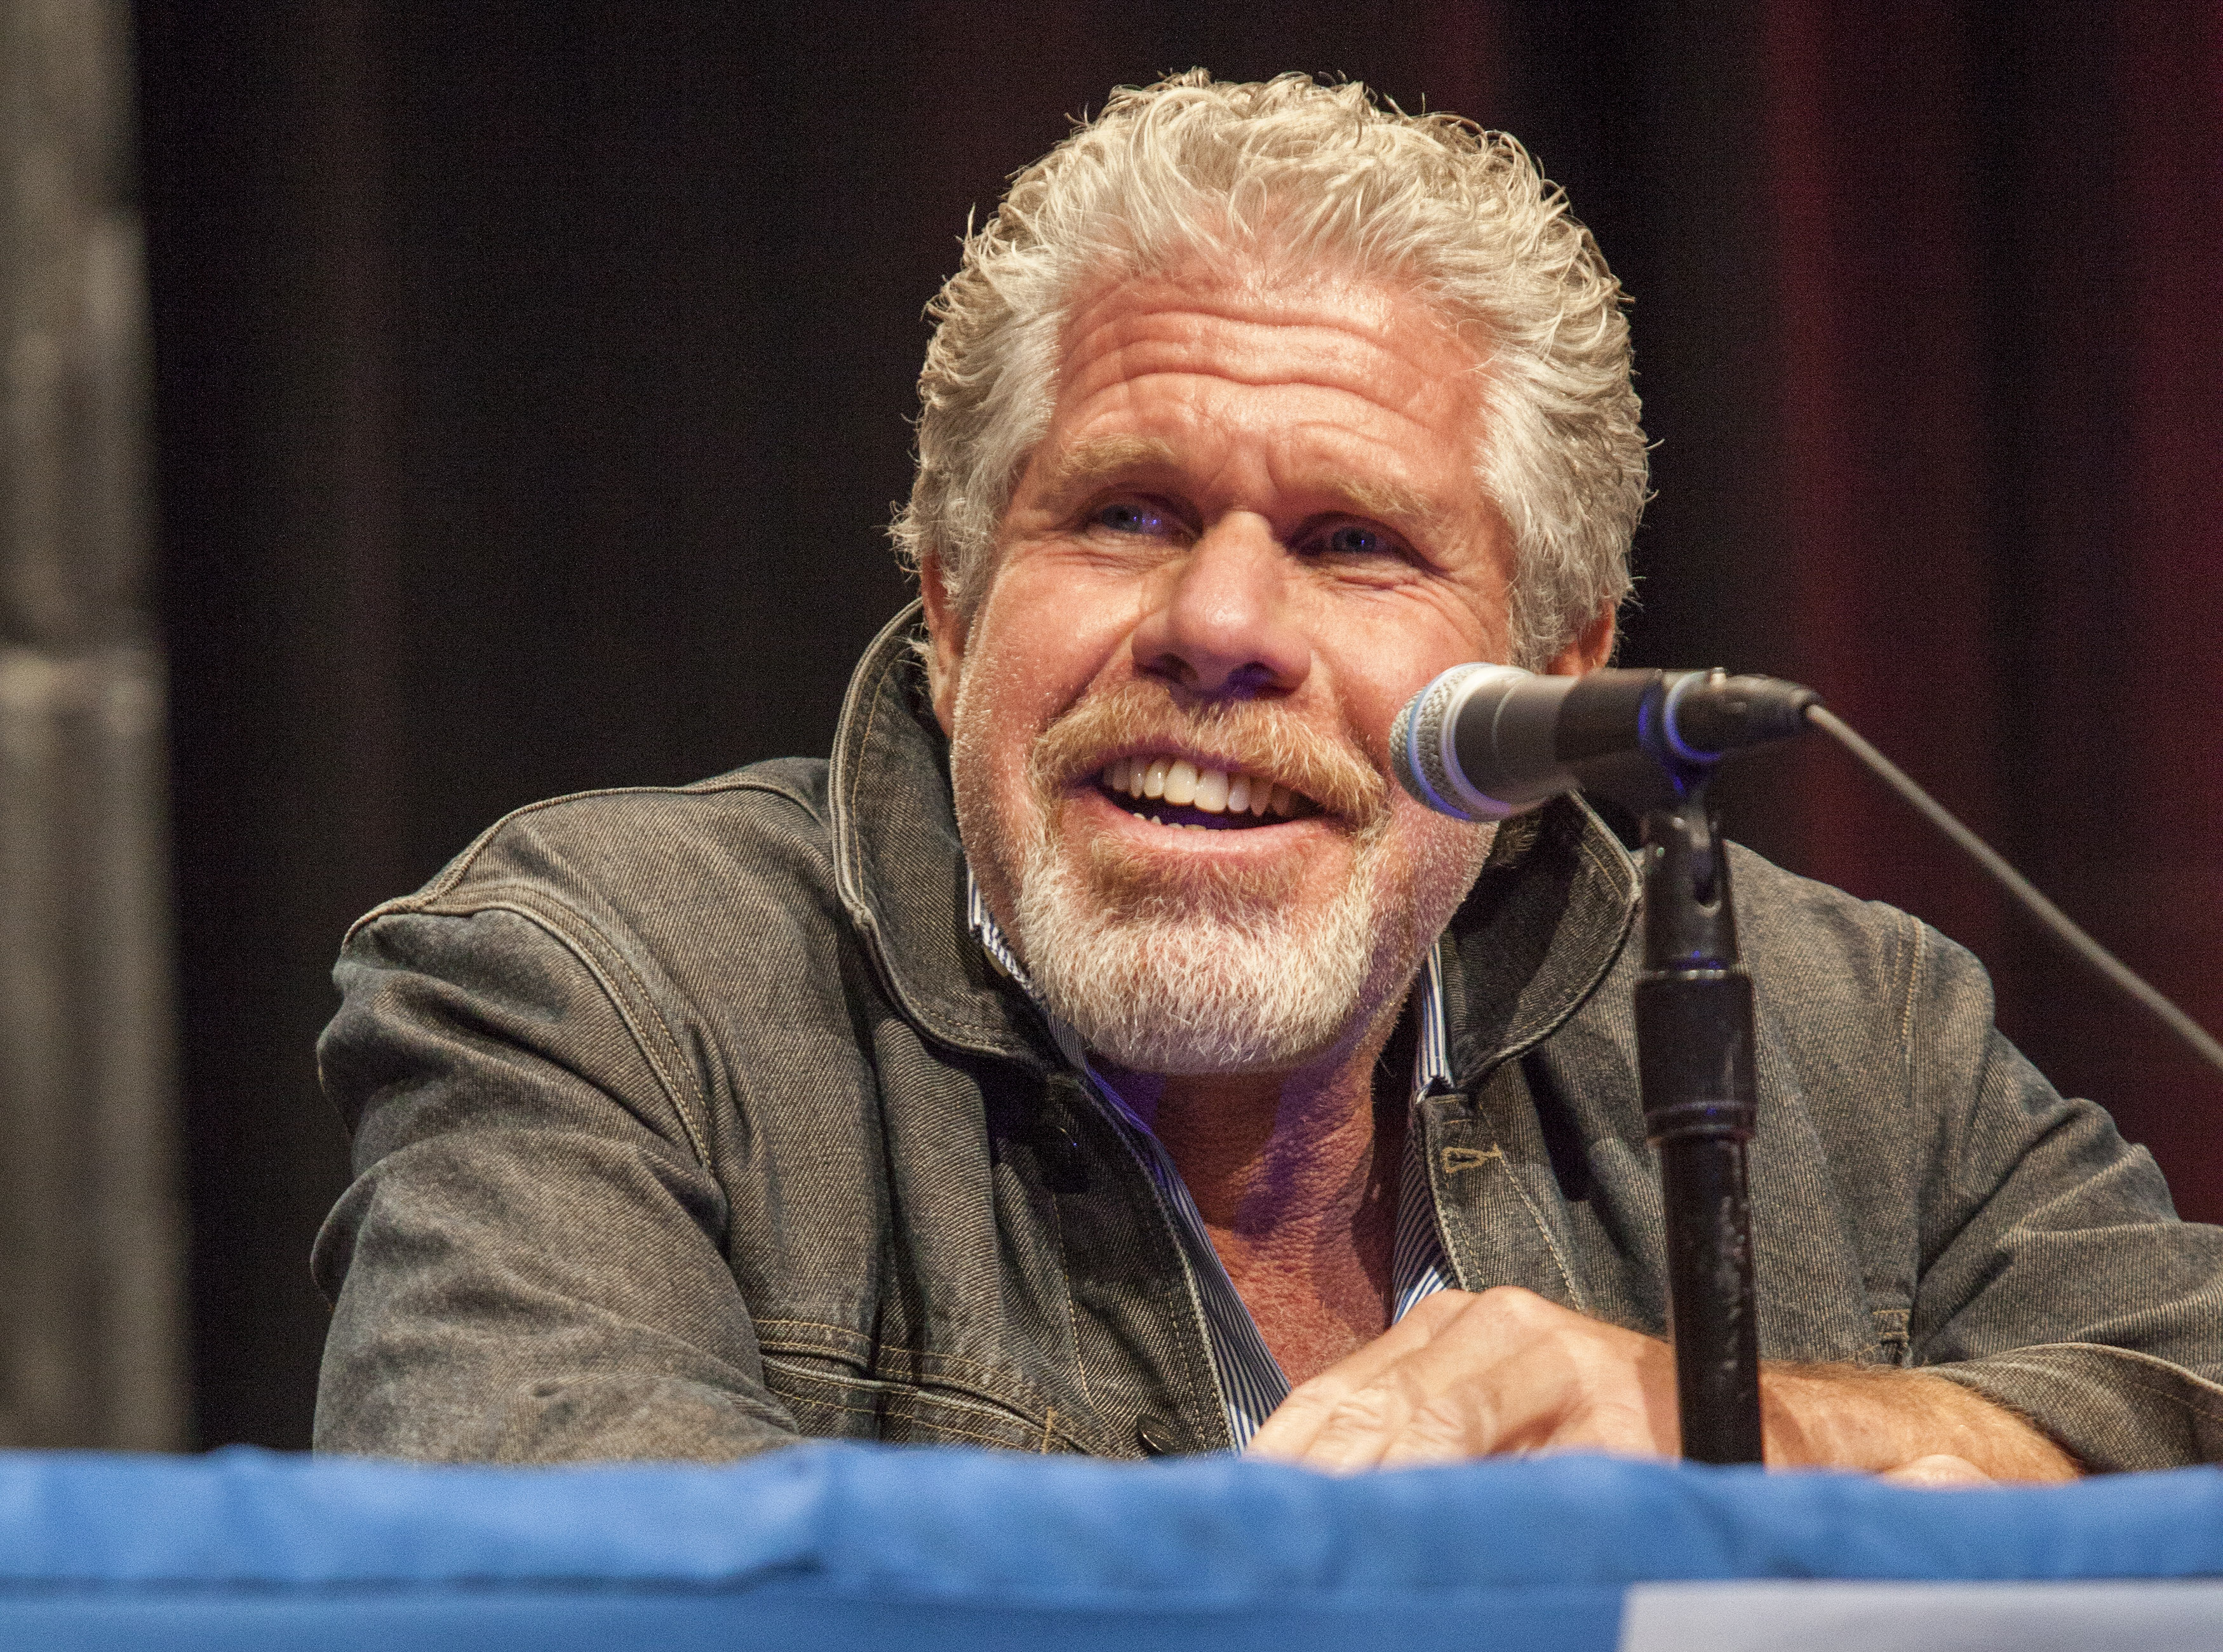 Sons of Anarchy' star talks about ignoring Ron Perlman this season